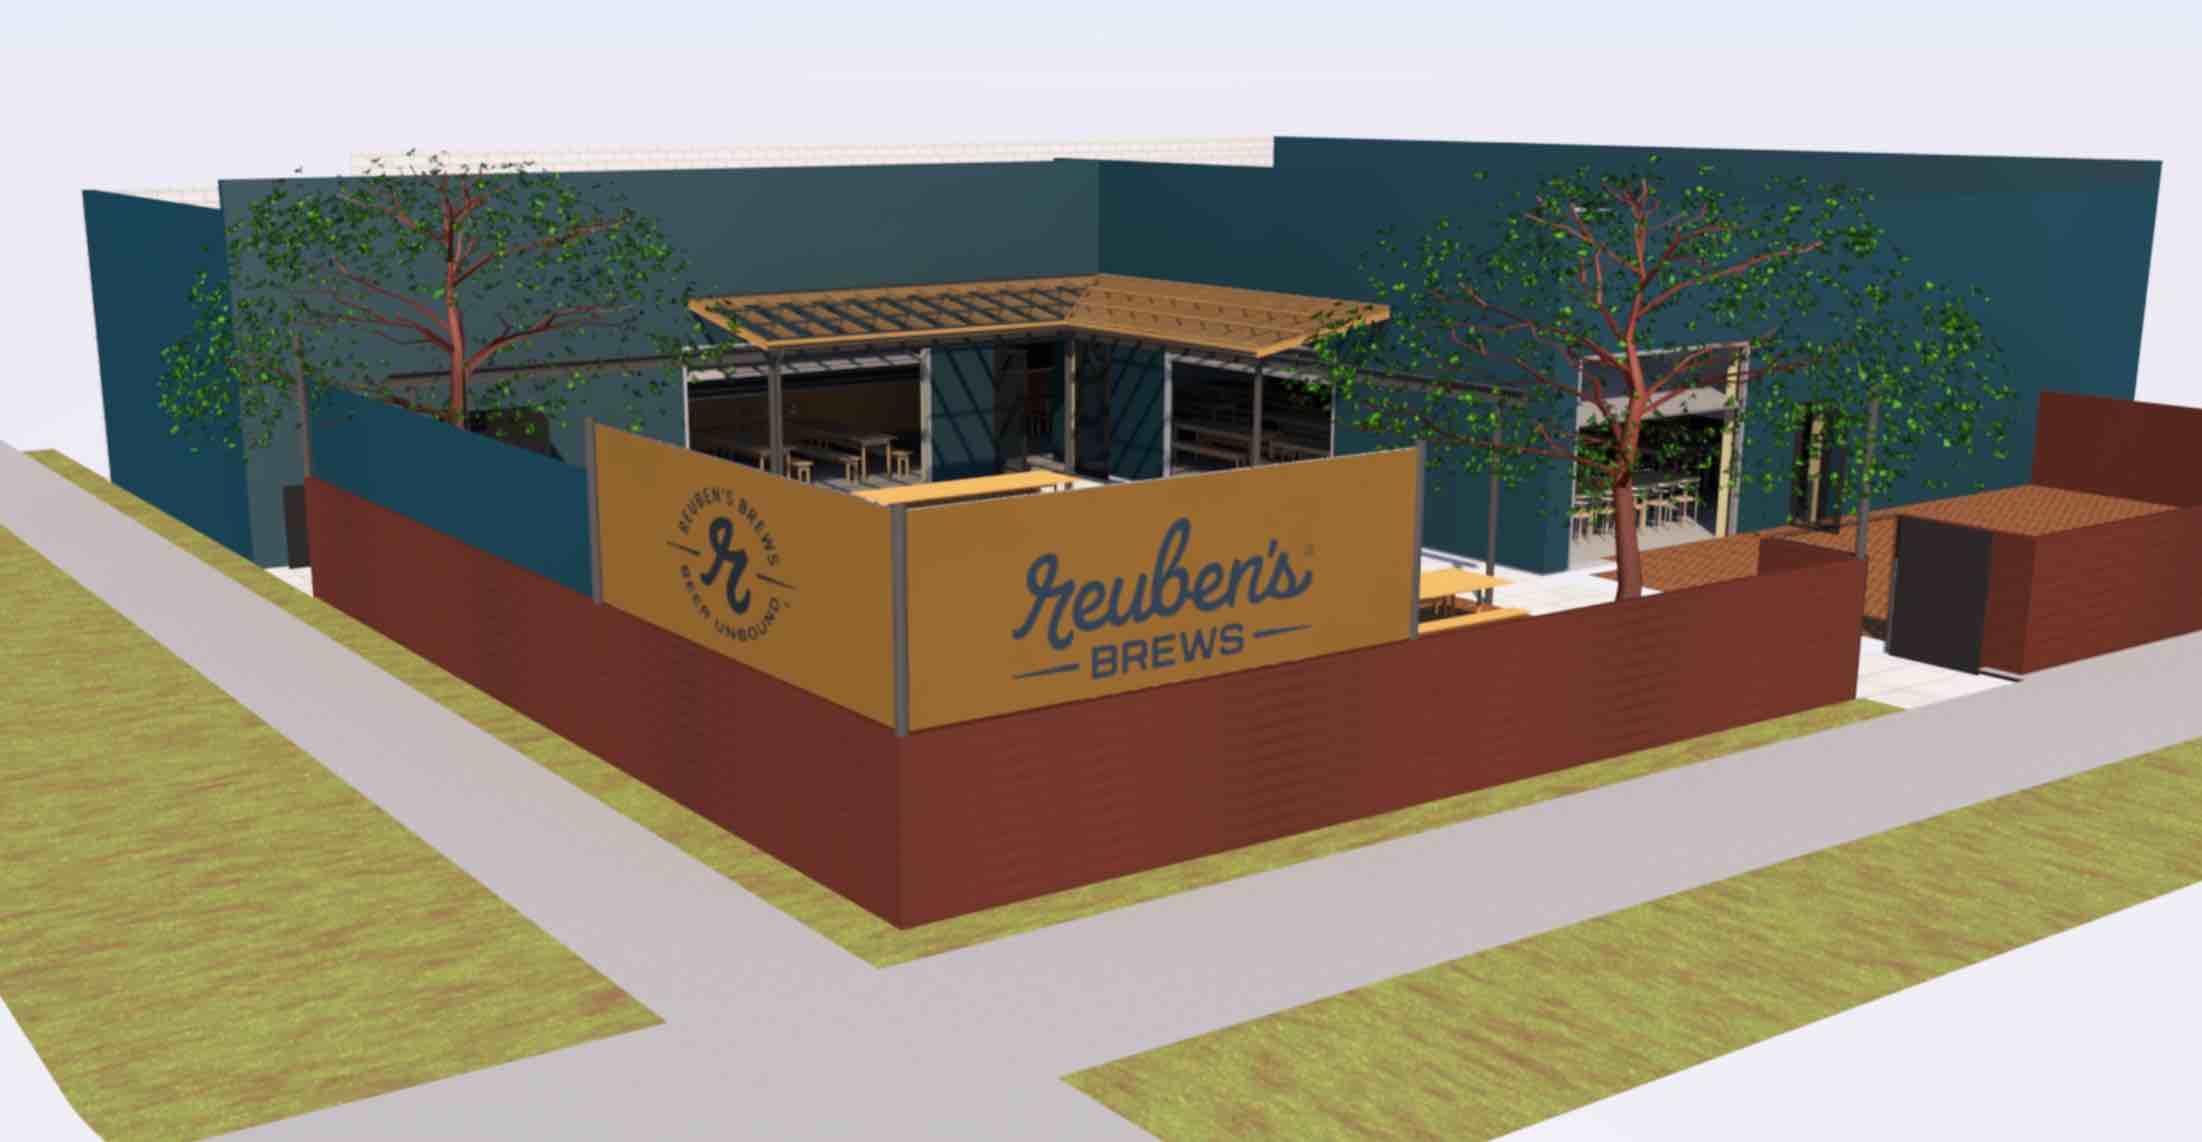 Architectural rendering of Reuben's Brews forthcoming patio.